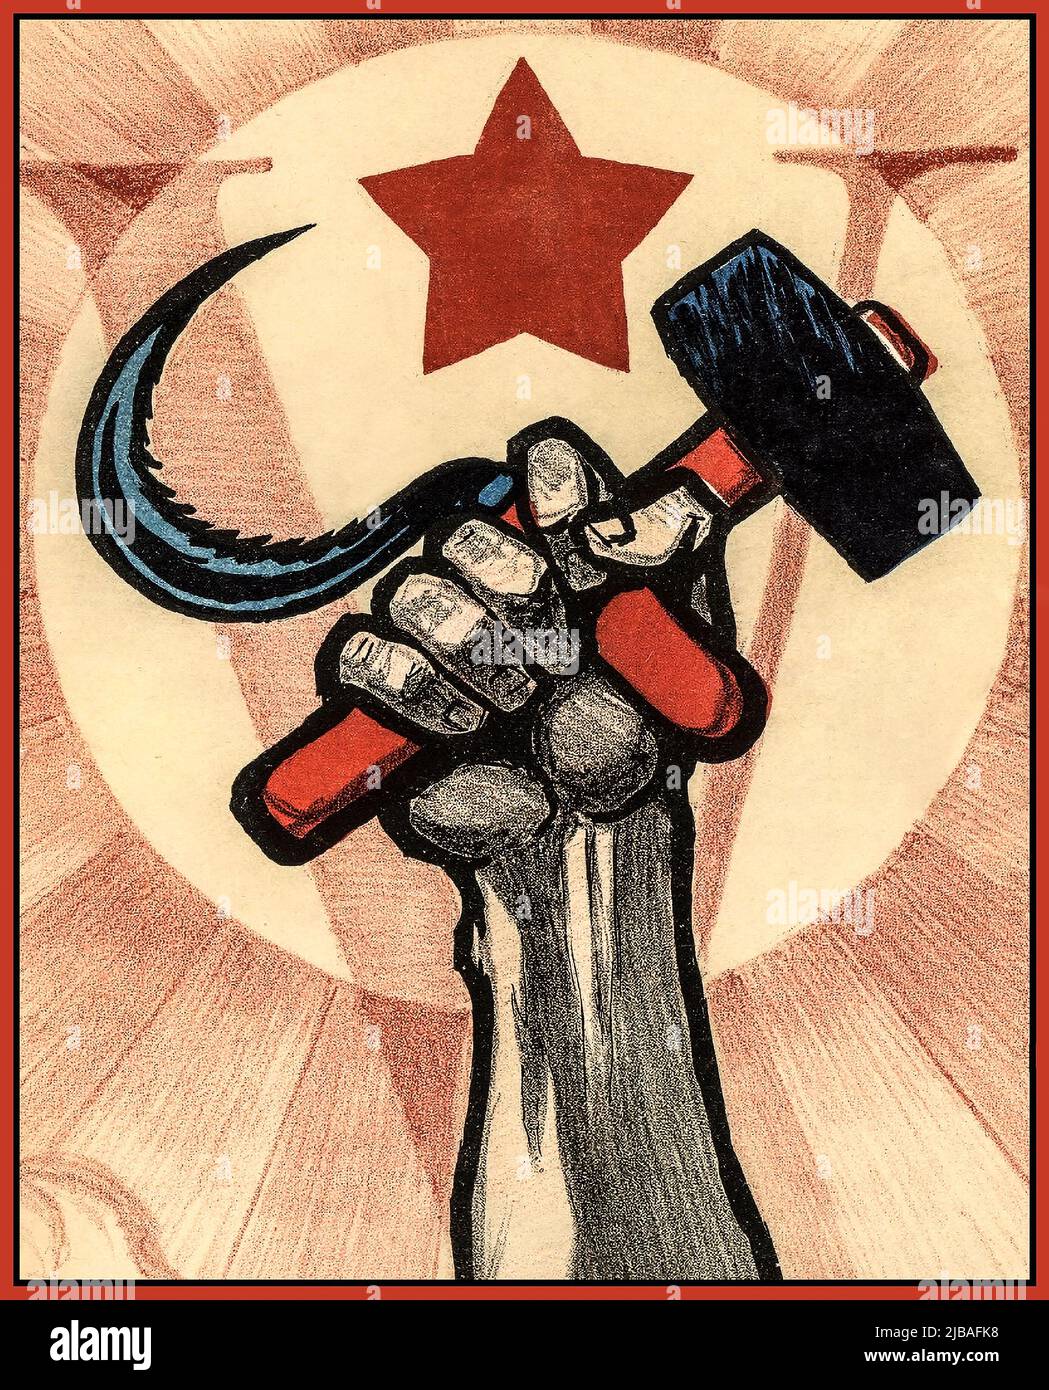 HAMMER & SICKLE Vintage 1920s Propaganda Political Soviet poster dedicated to the 5th anniversary of the October Revolution and IV Congress of the Communist International. Soviet Union USSR Russia Date1922 Stock Photo